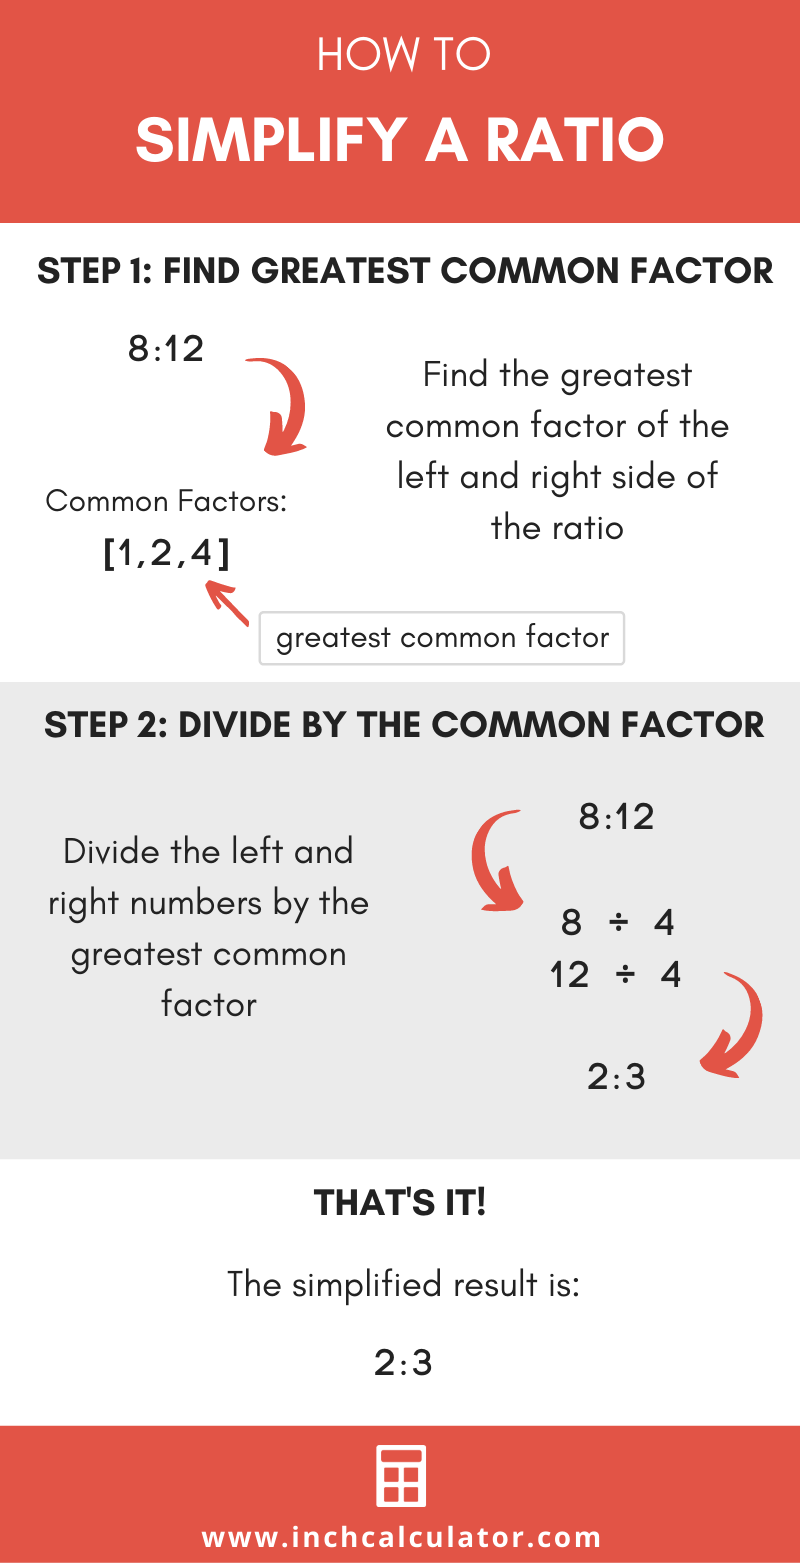 Convert the ratio 6 : 24 is simplest form.